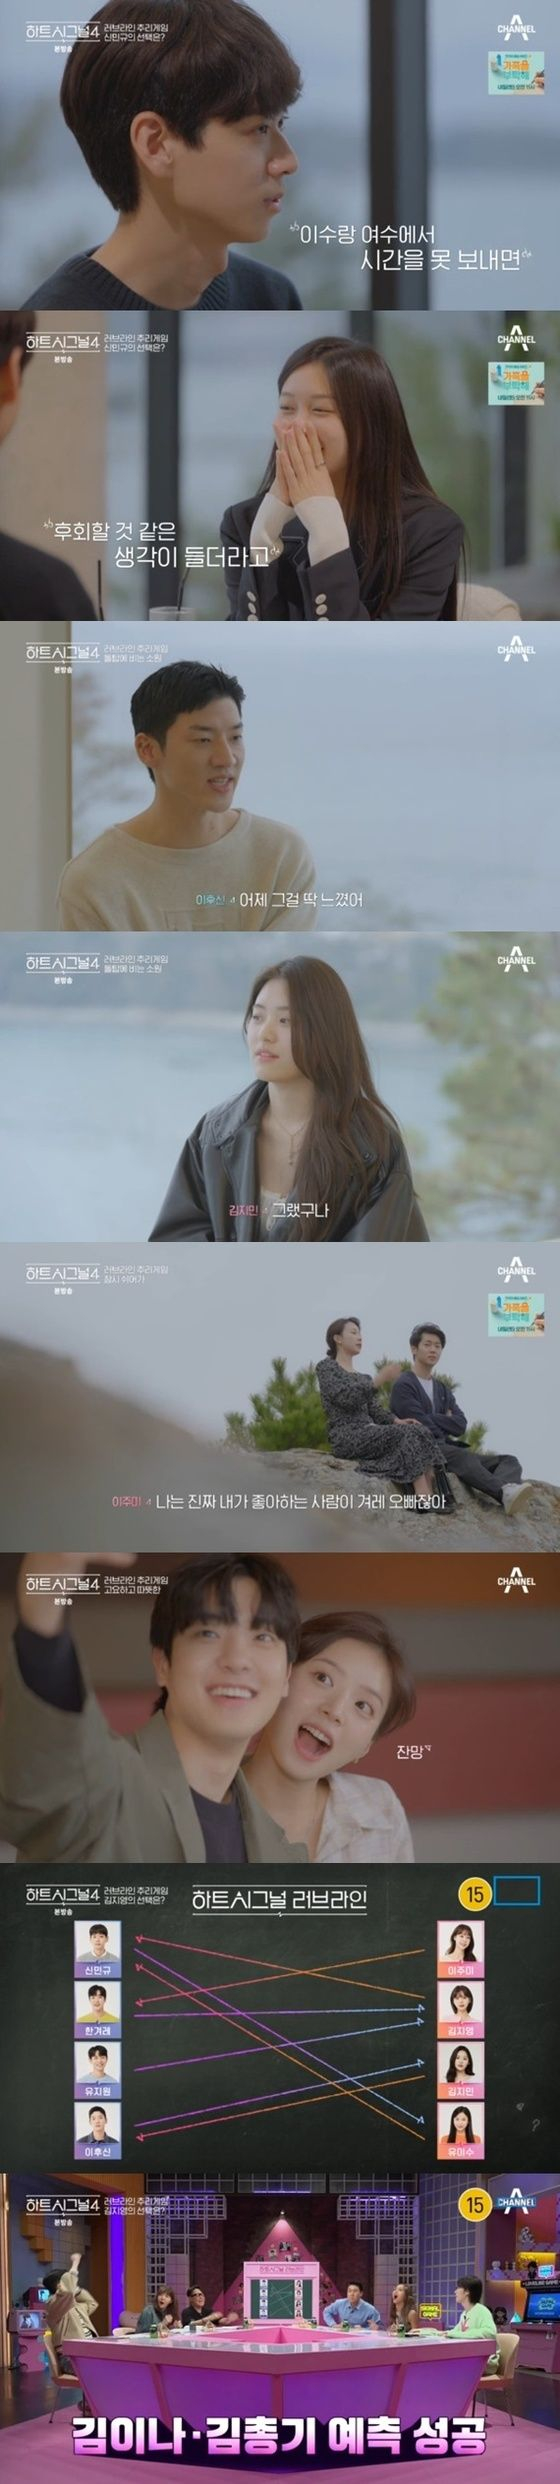 Unexpected Love Dynamics in ‘Heart Signal Season 4’ as Predictions Come True